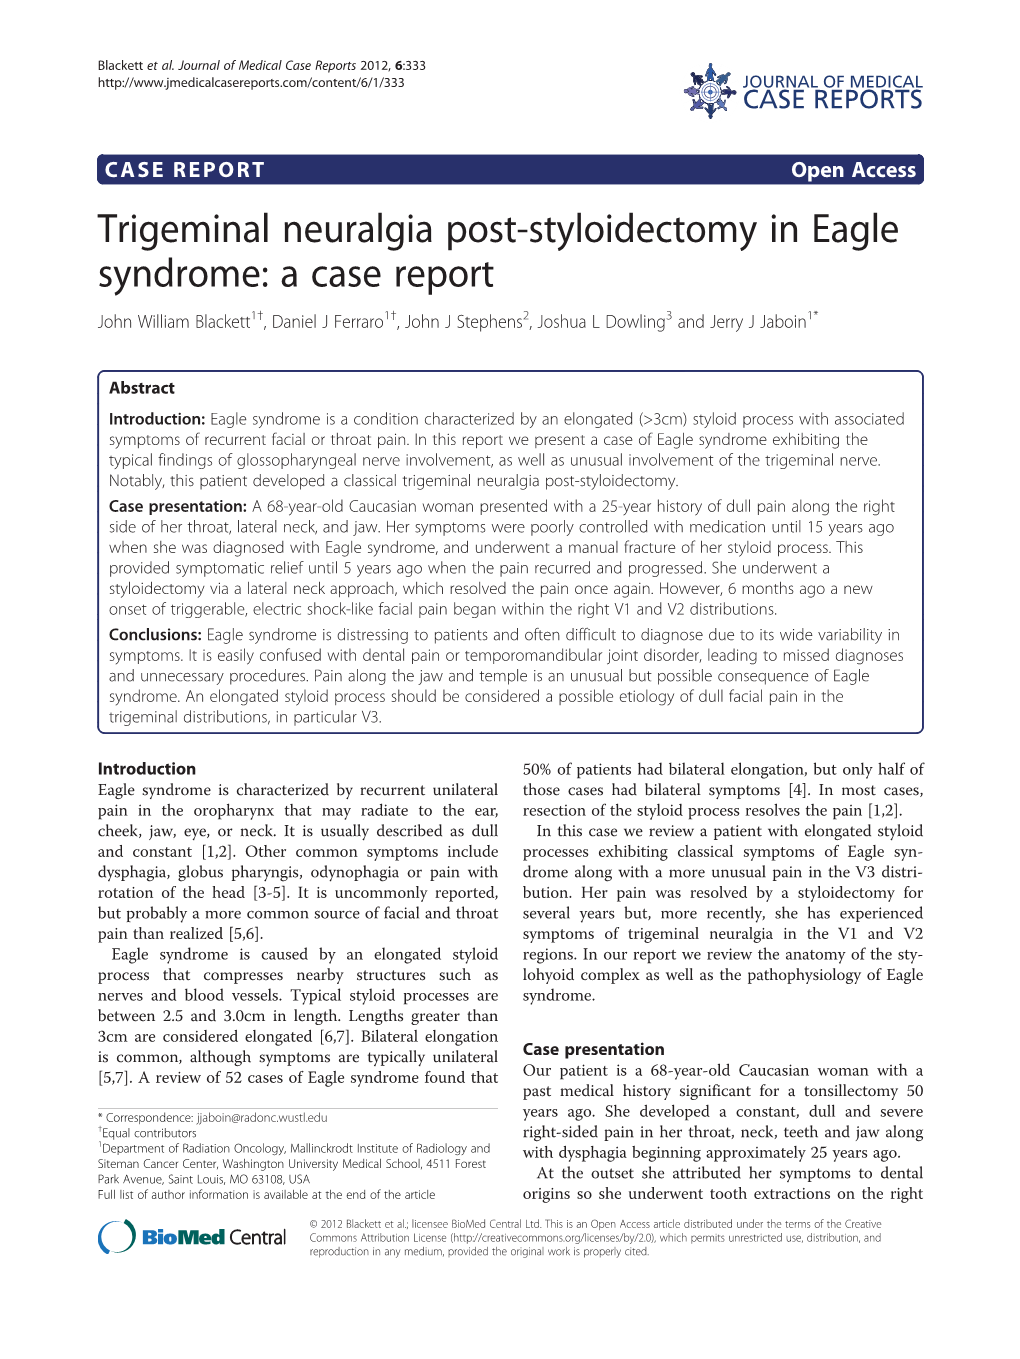 Trigeminal Neuralgia Post-Styloidectomy in Eagle Syndrome